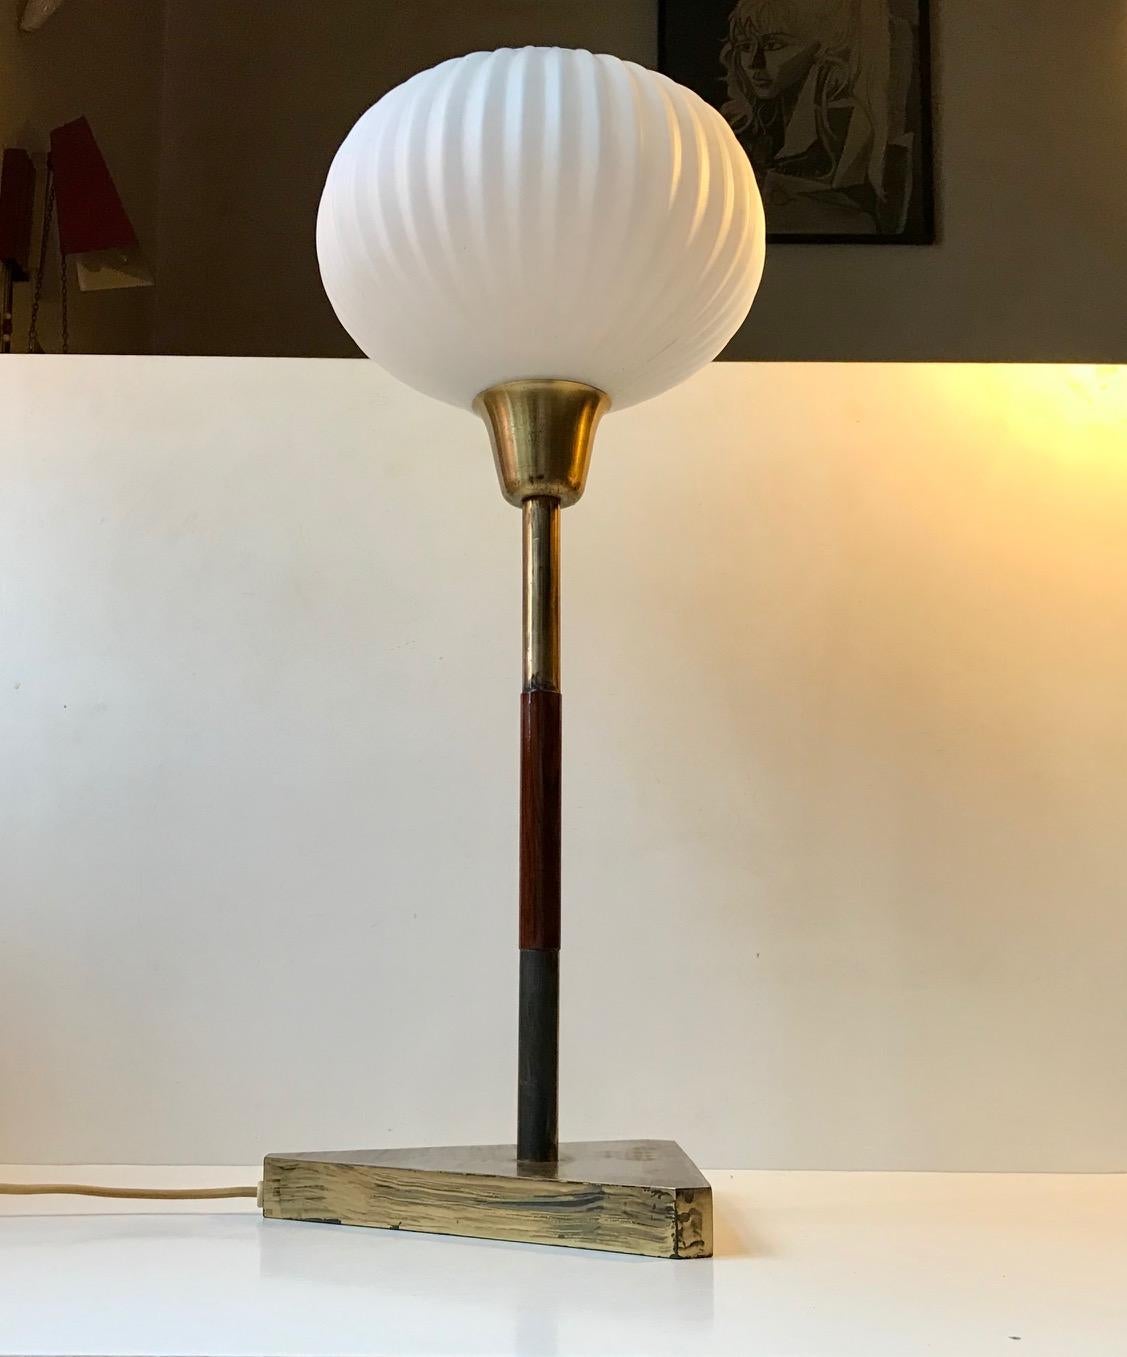 Vintage Scandinavian Table Lamp in Brass and Opaline Glass, 1960s For Sale 1